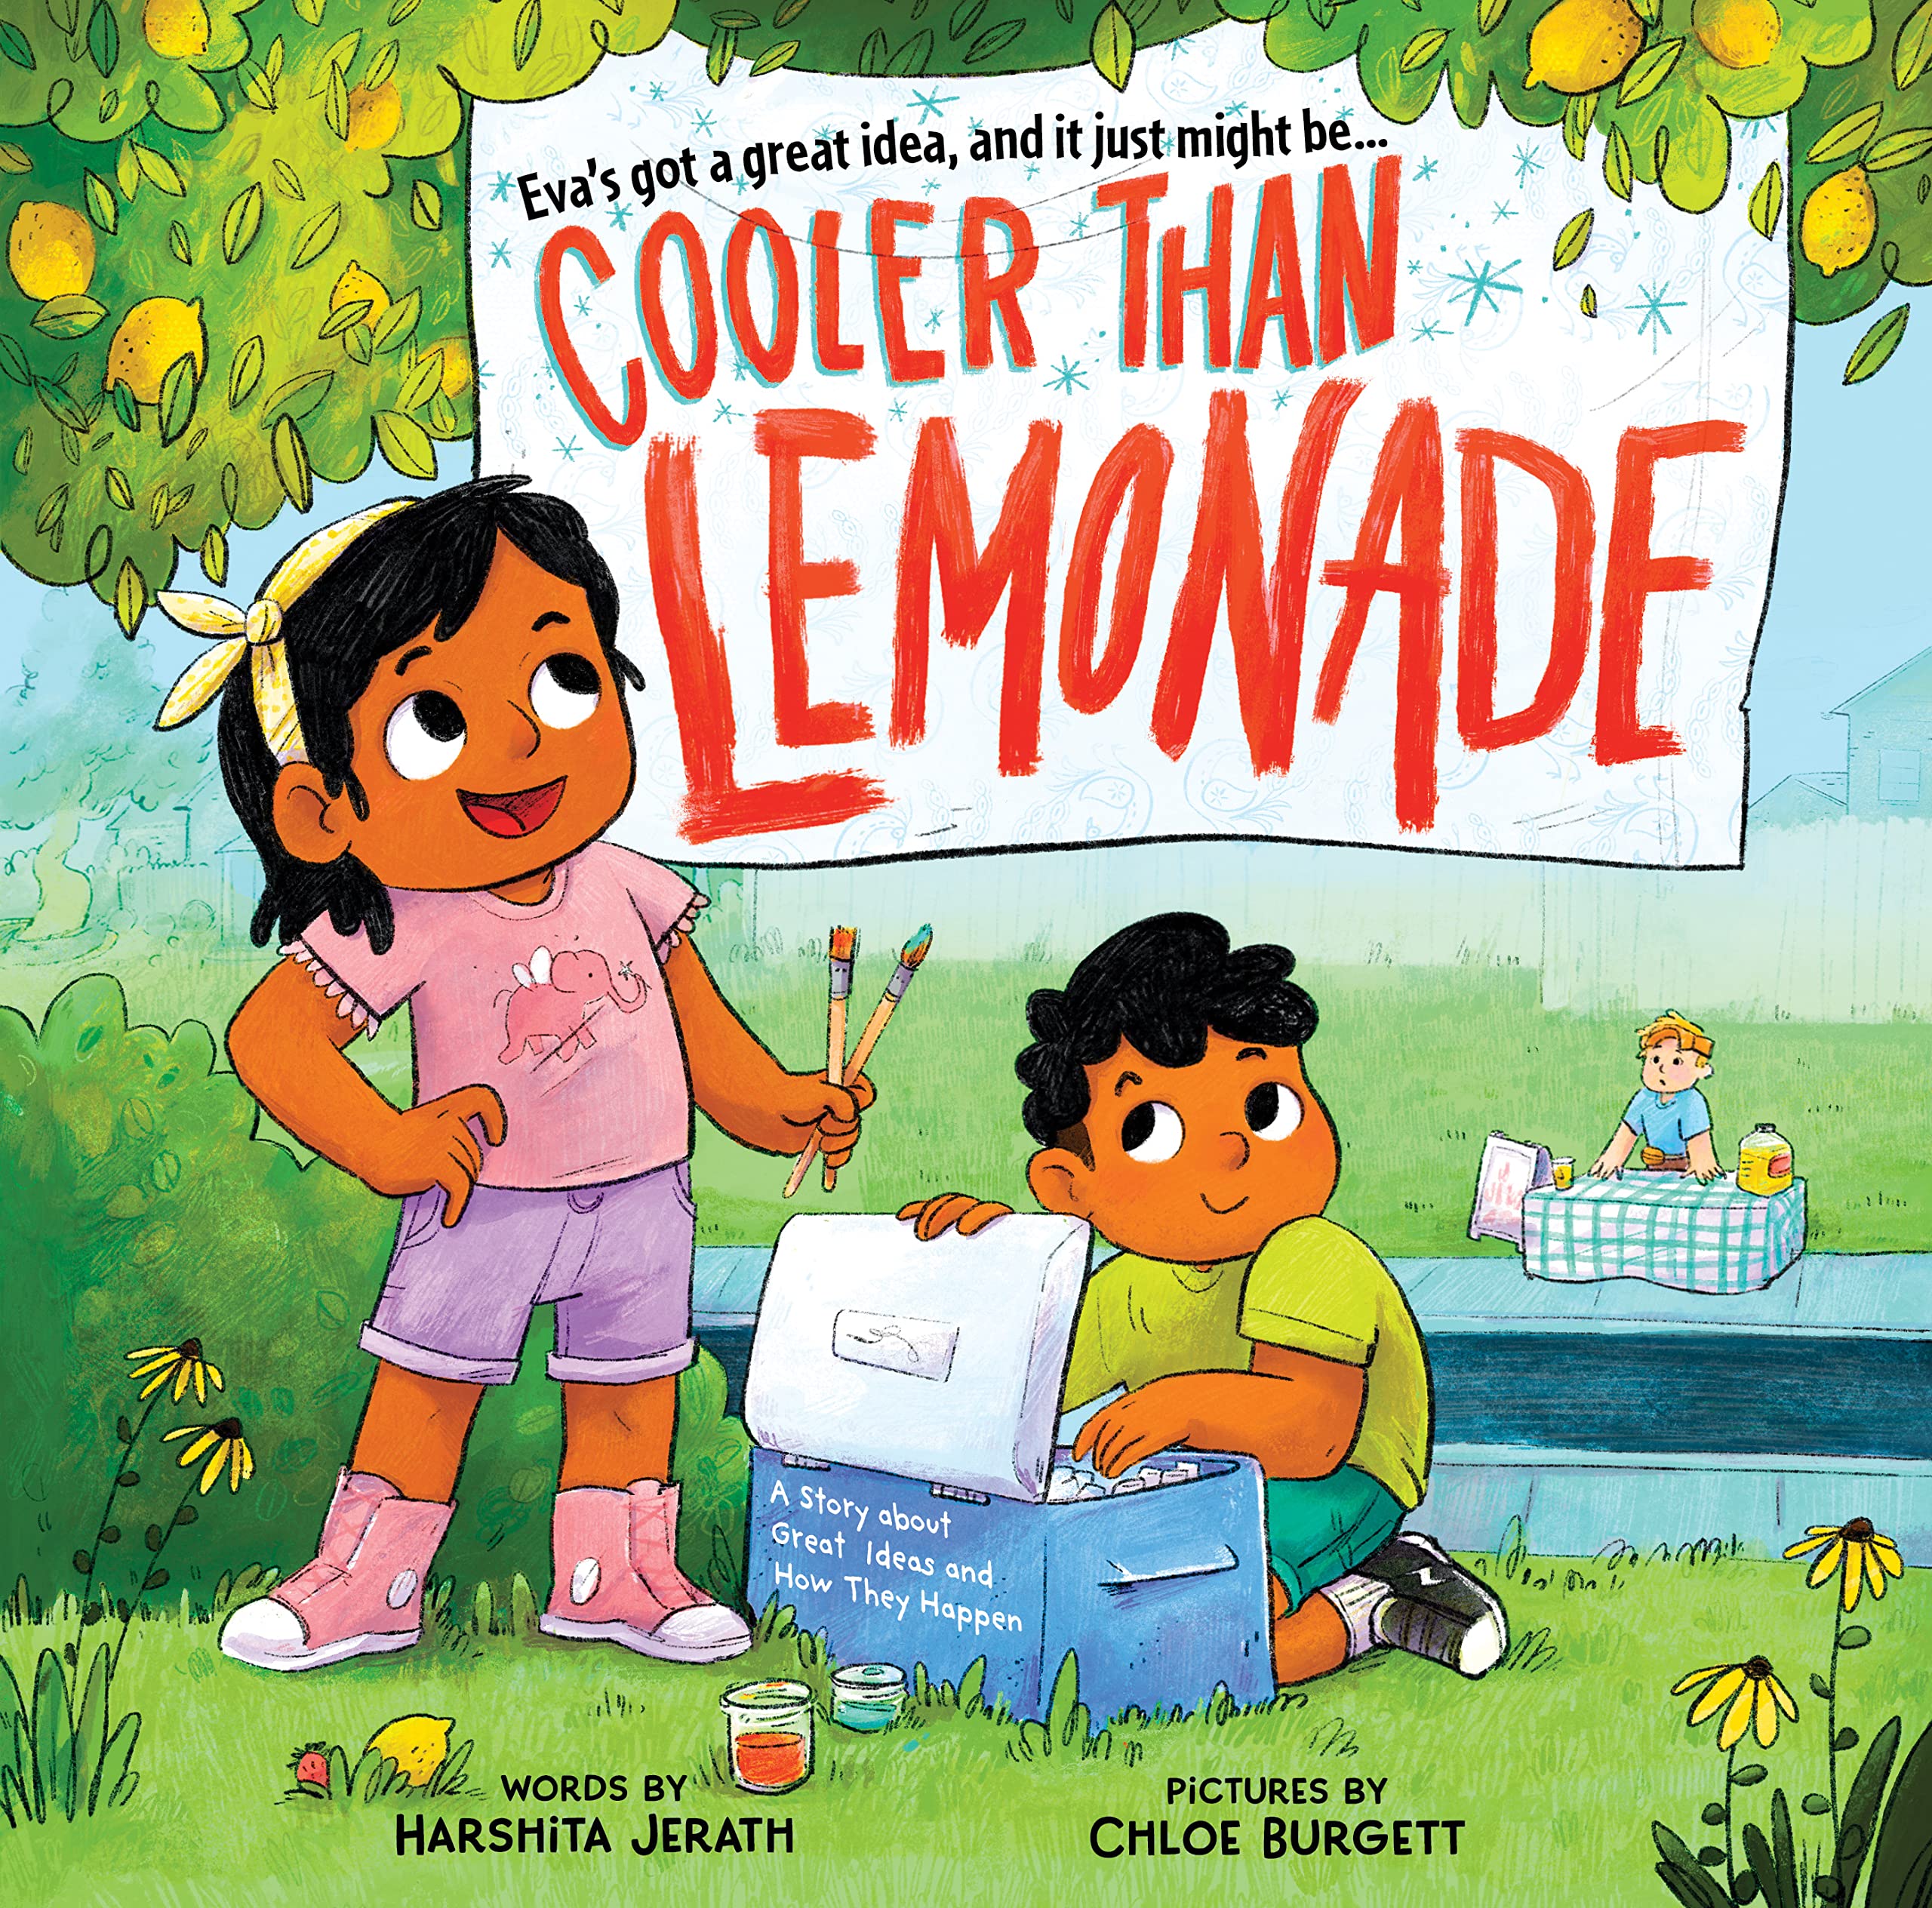 Cooler Than Lemonade: A Story about Great Ideas and How They Happen by Jerath, Harshita